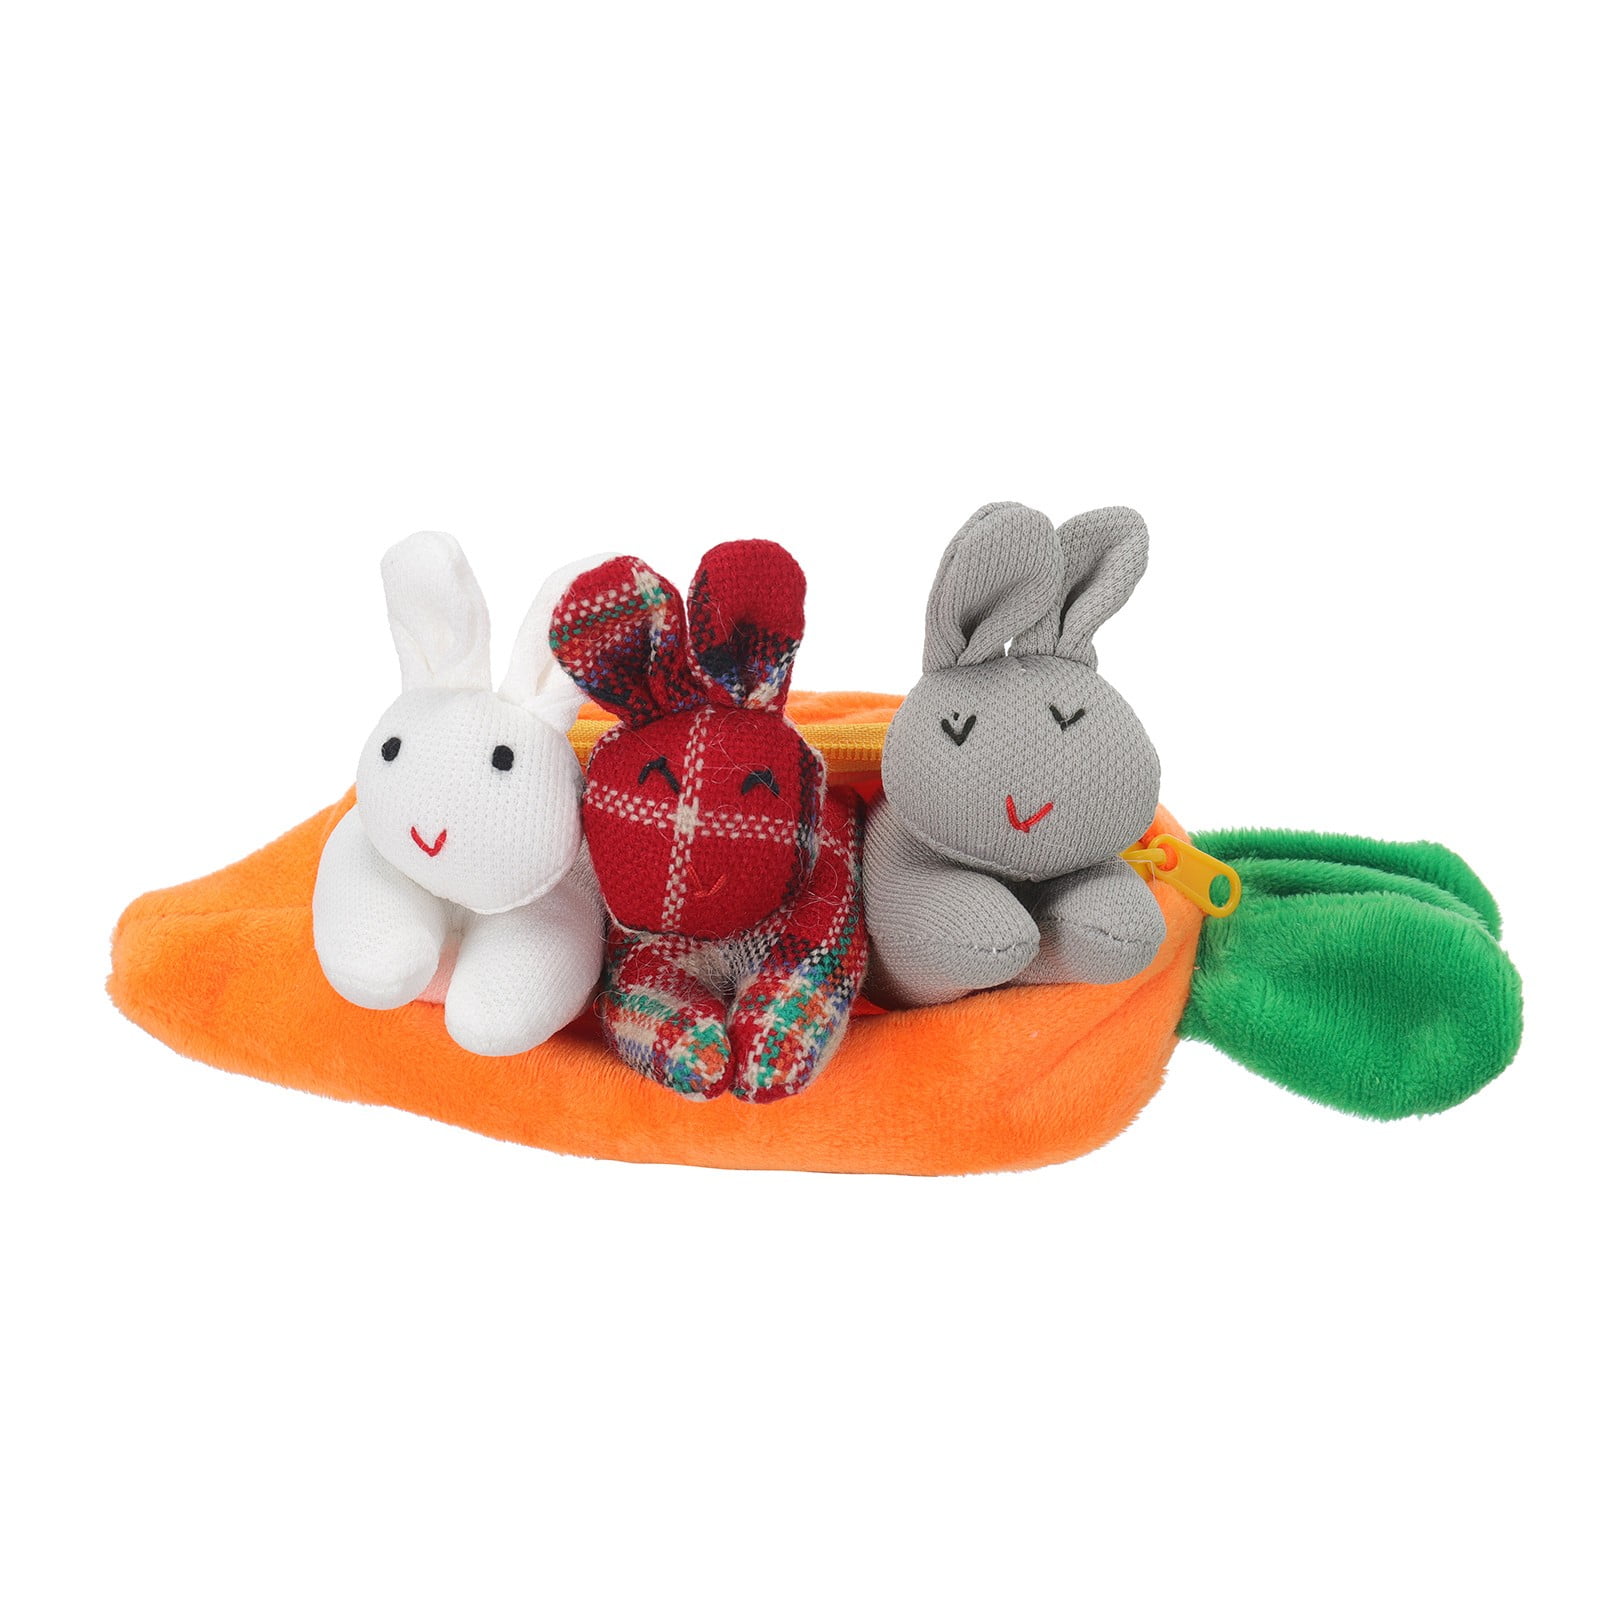 Manfiter Plush Bunny Toys in Carrot Pouch, Three Bunnies in A Carrot Purse, Unzip The Rabbit Doll Toy 3 Bunnies in Carrot Purse, Cute Easter Bunny